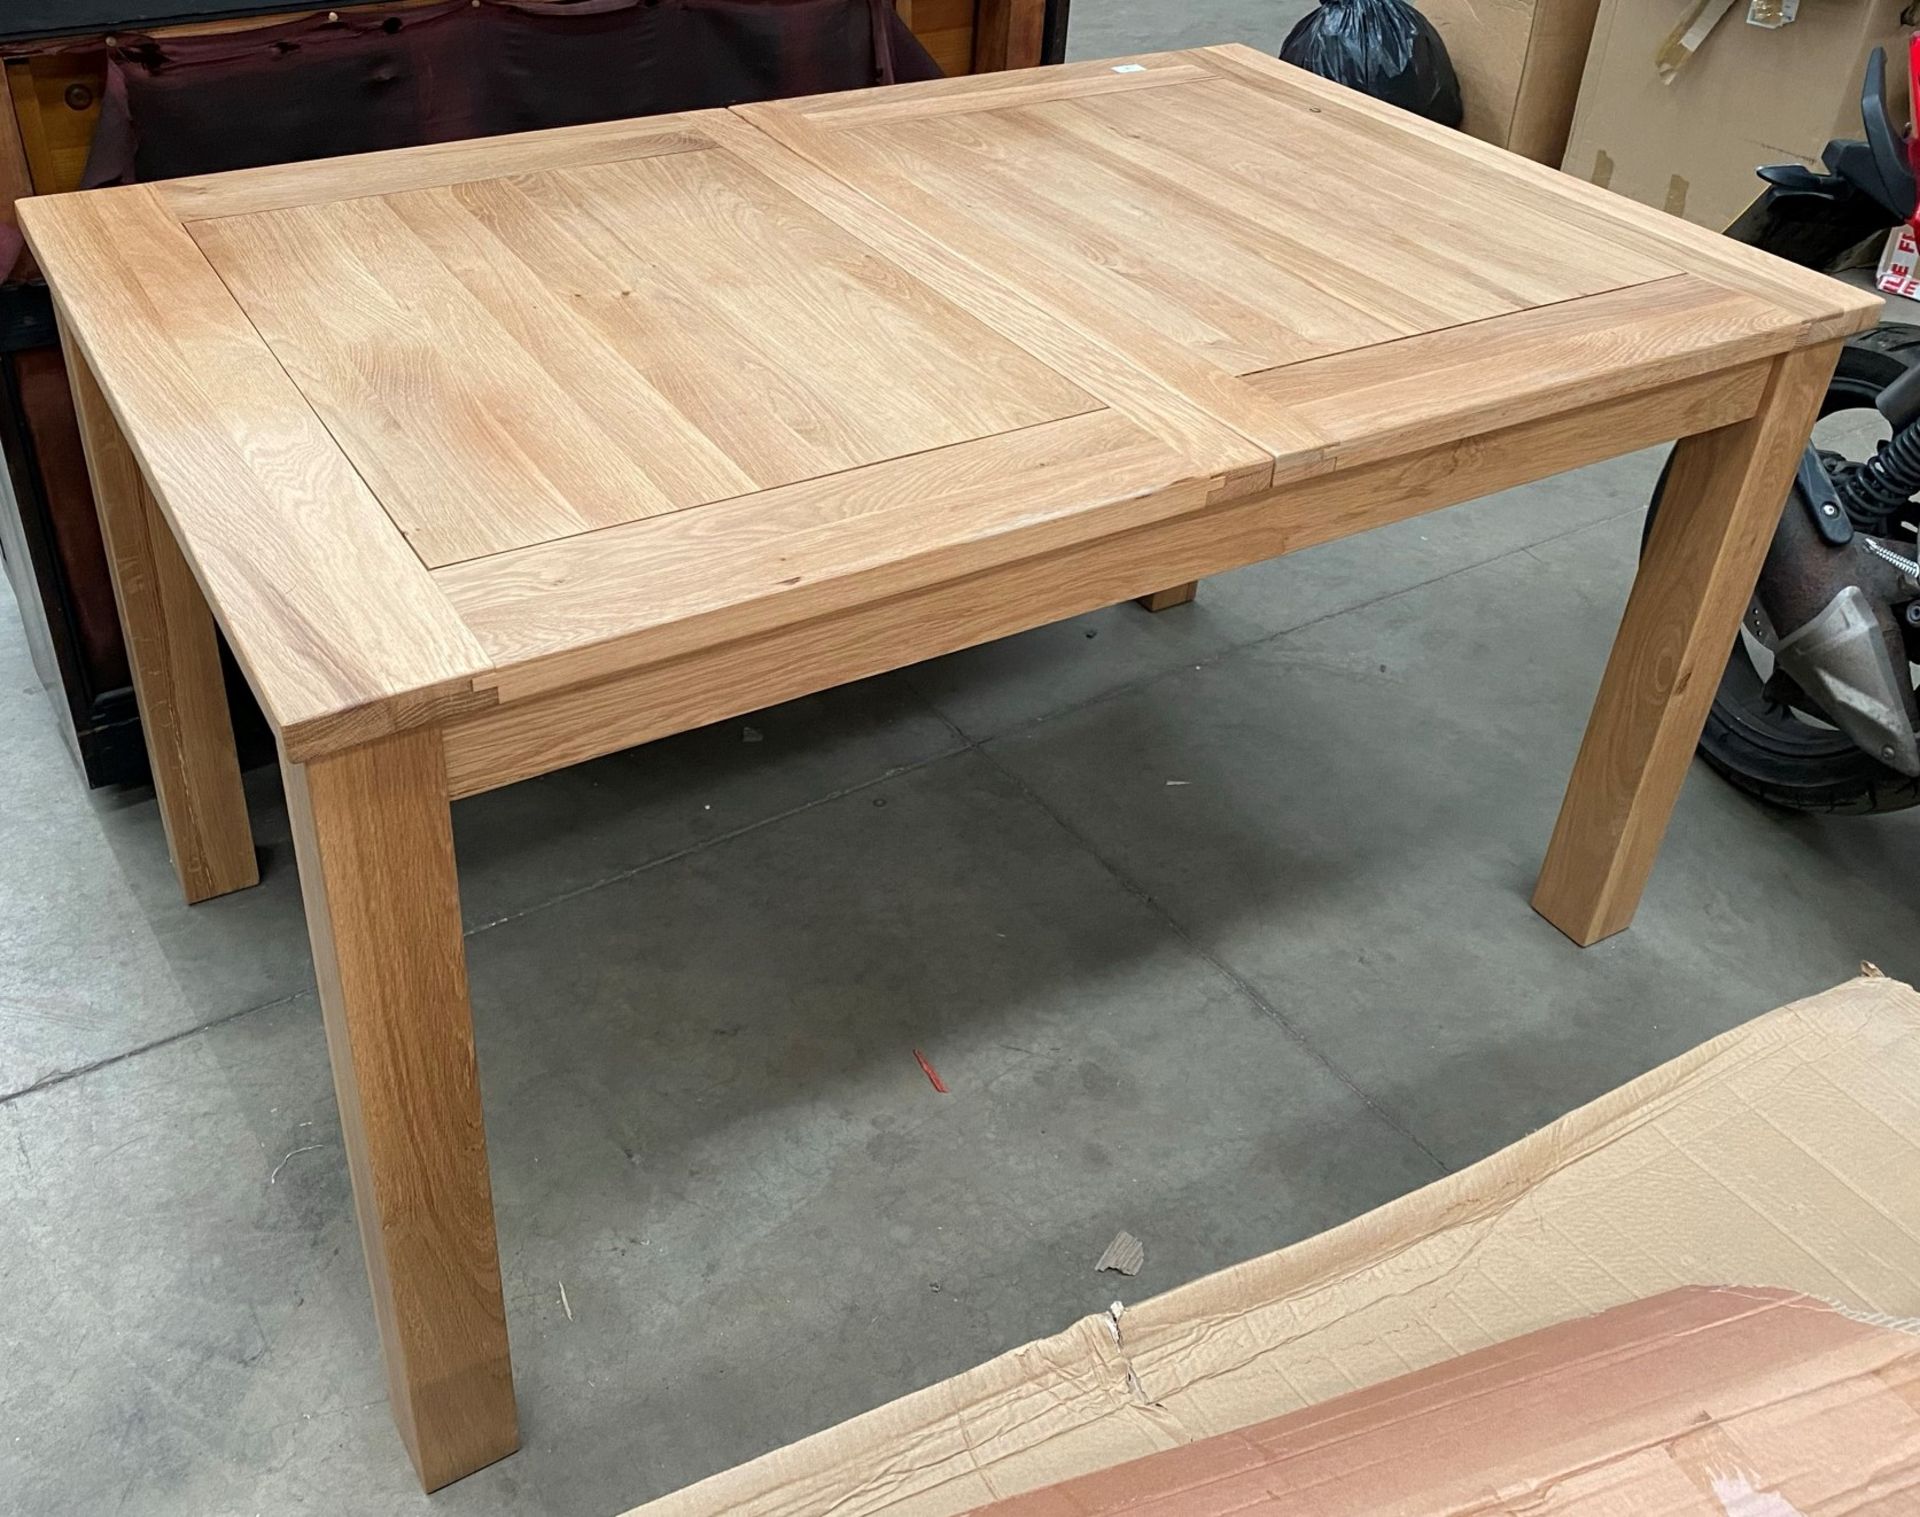 Natural oak extending dining table 142cm x 92cm with two extra leaves extending to approx 216cm